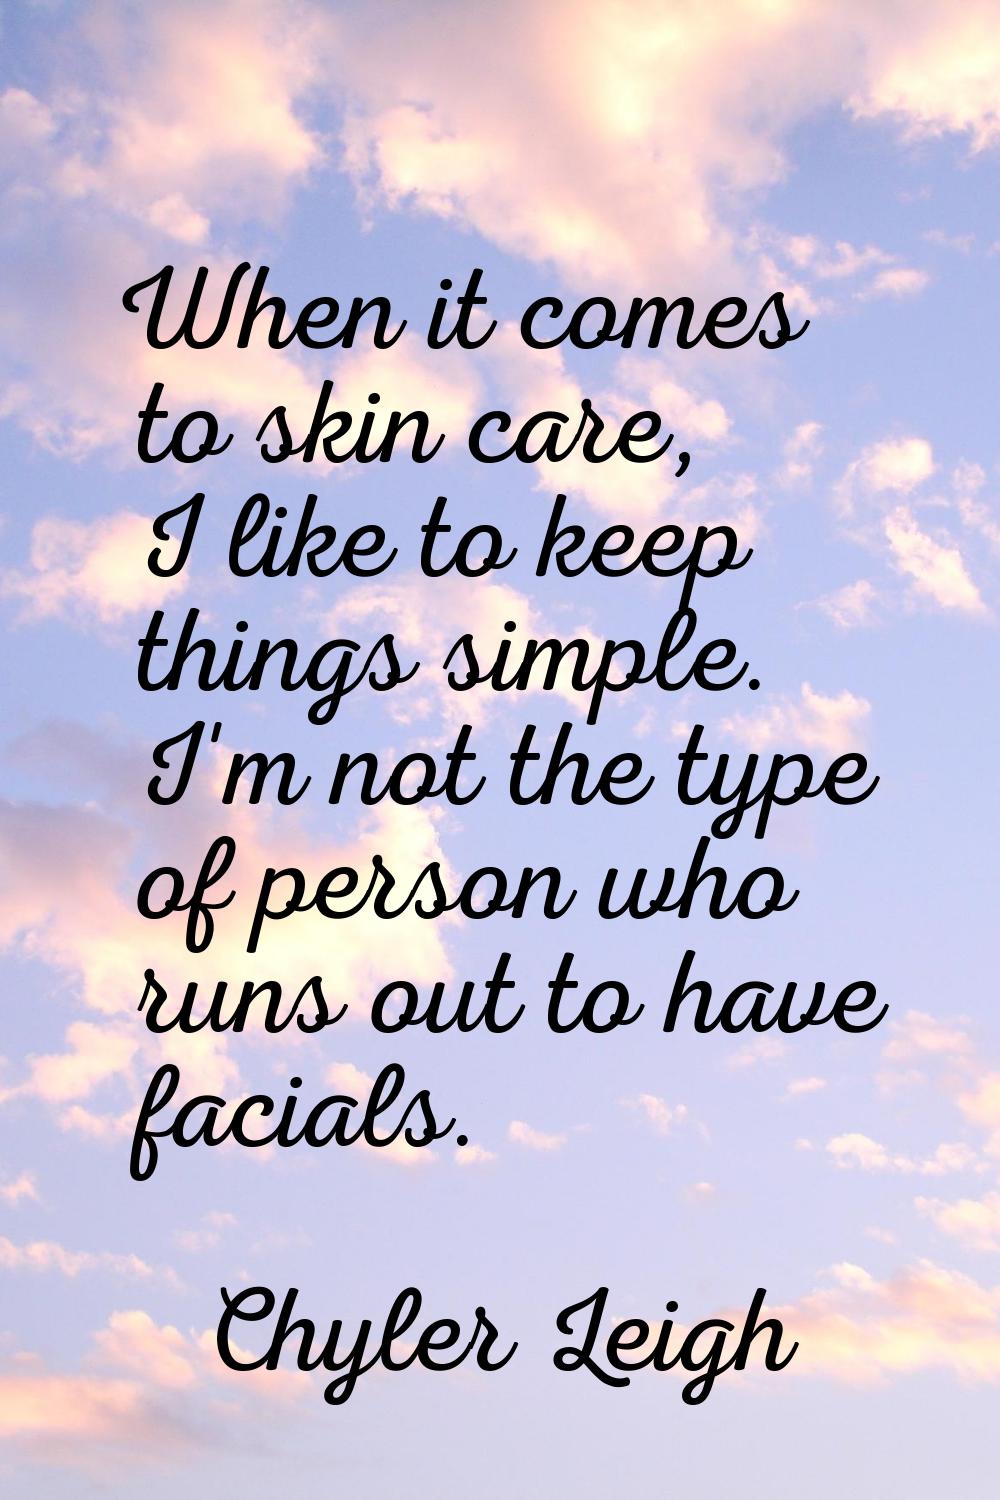 When it comes to skin care, I like to keep things simple. I'm not the type of person who runs out t